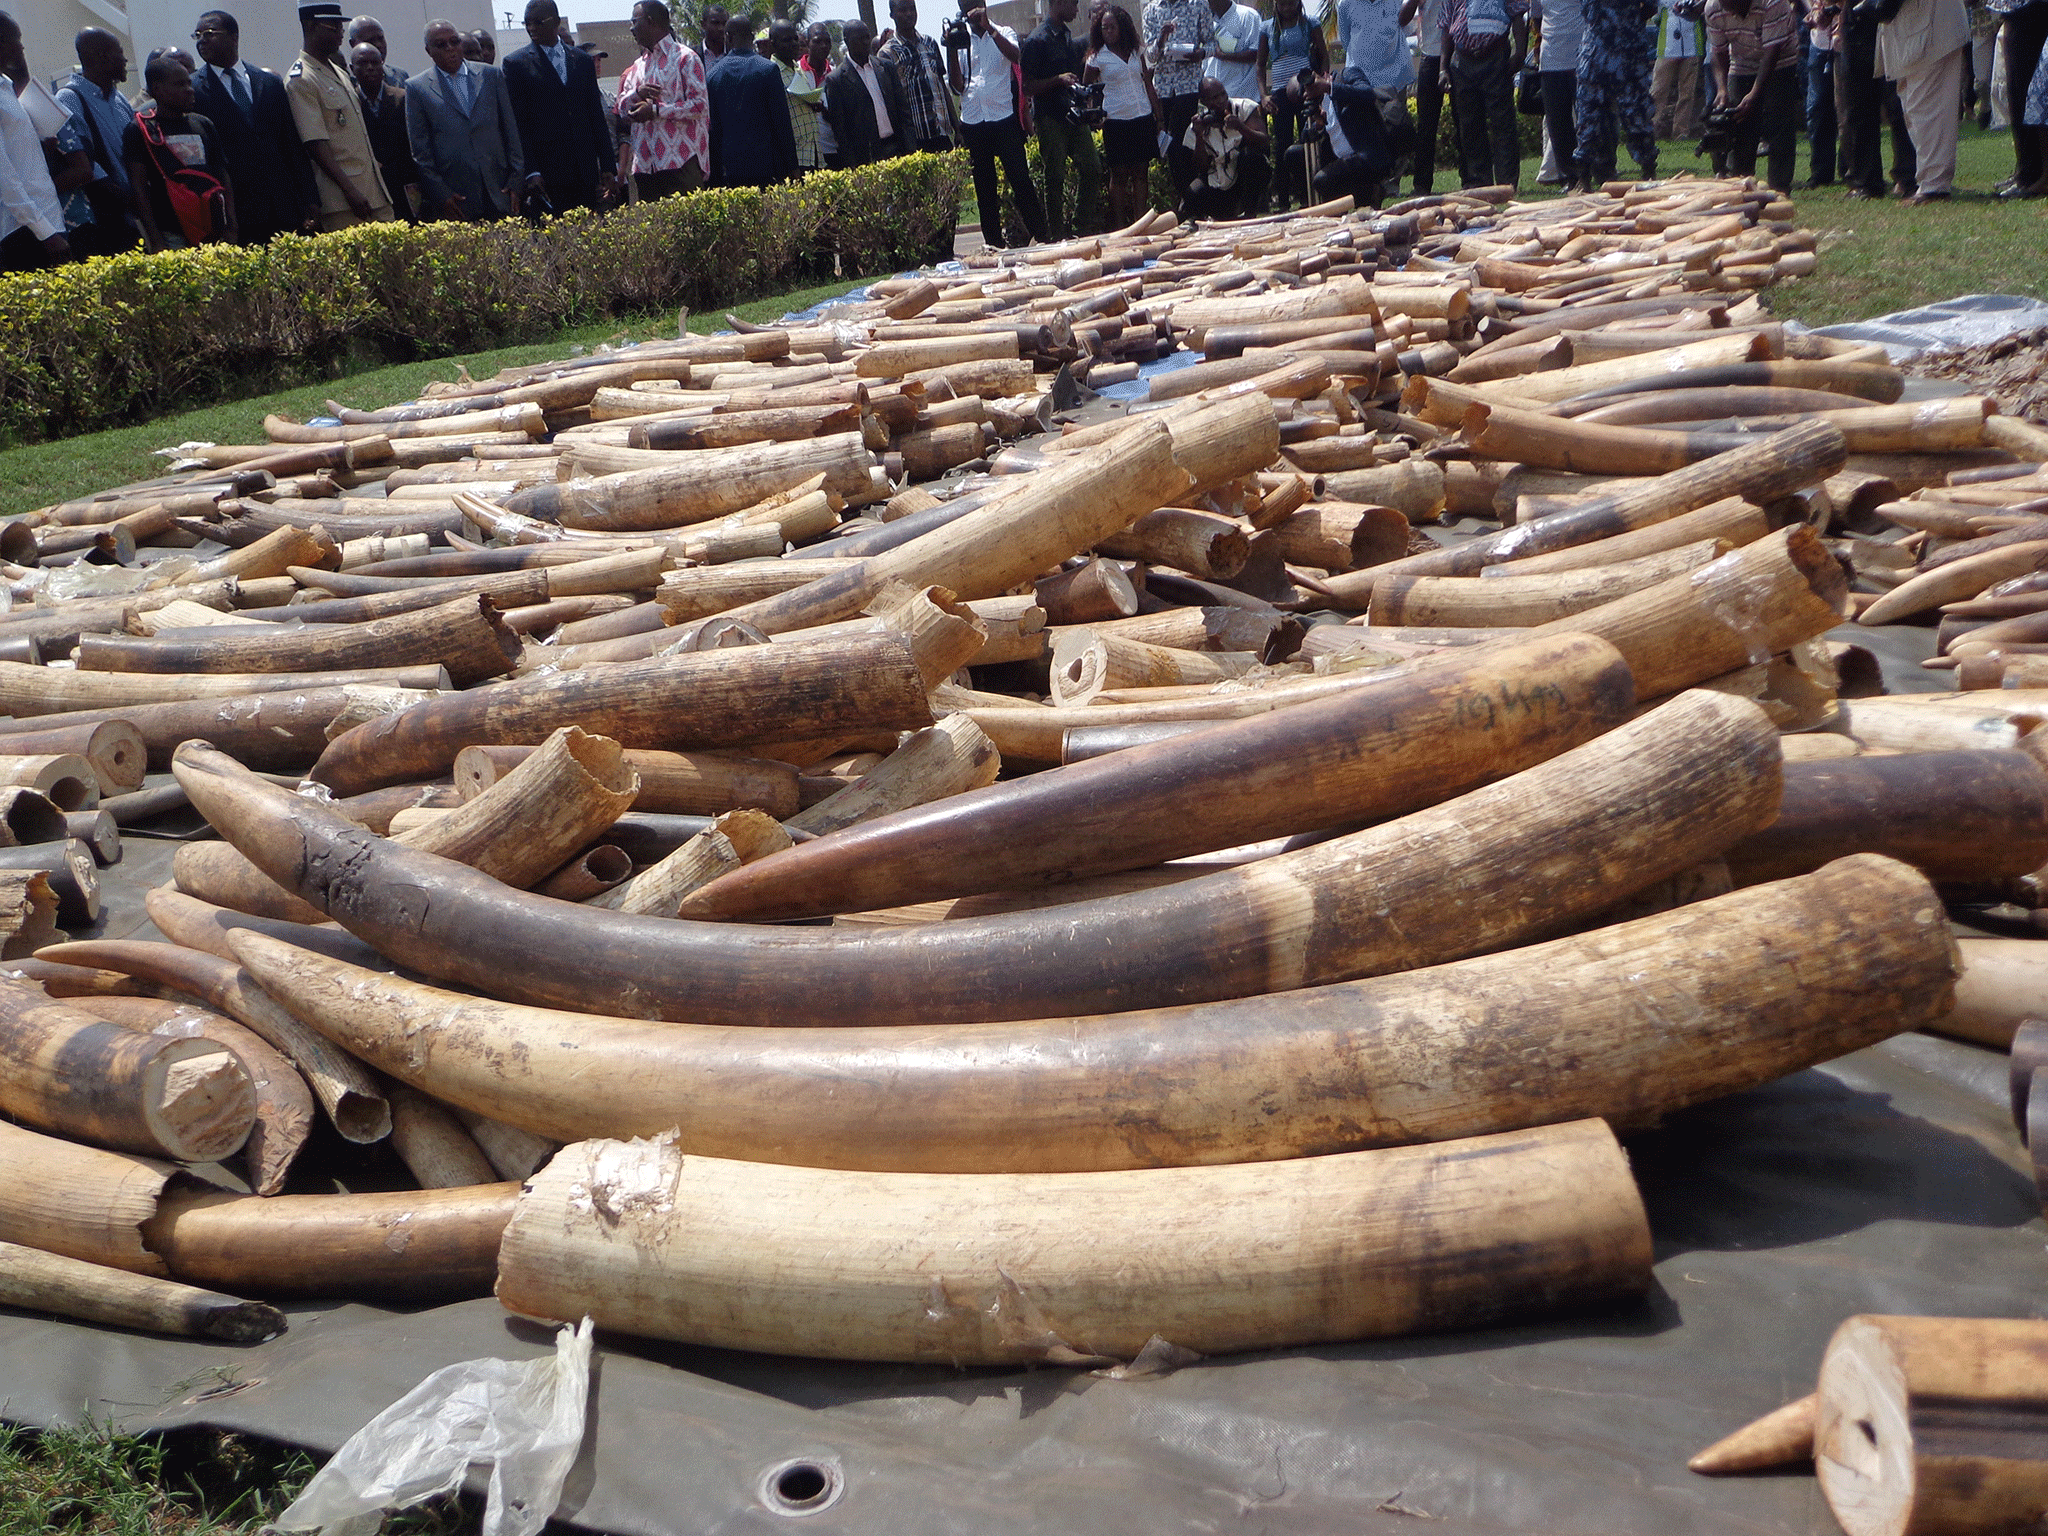 Ivory trade in the US: Items worth $1.5million sold on ...